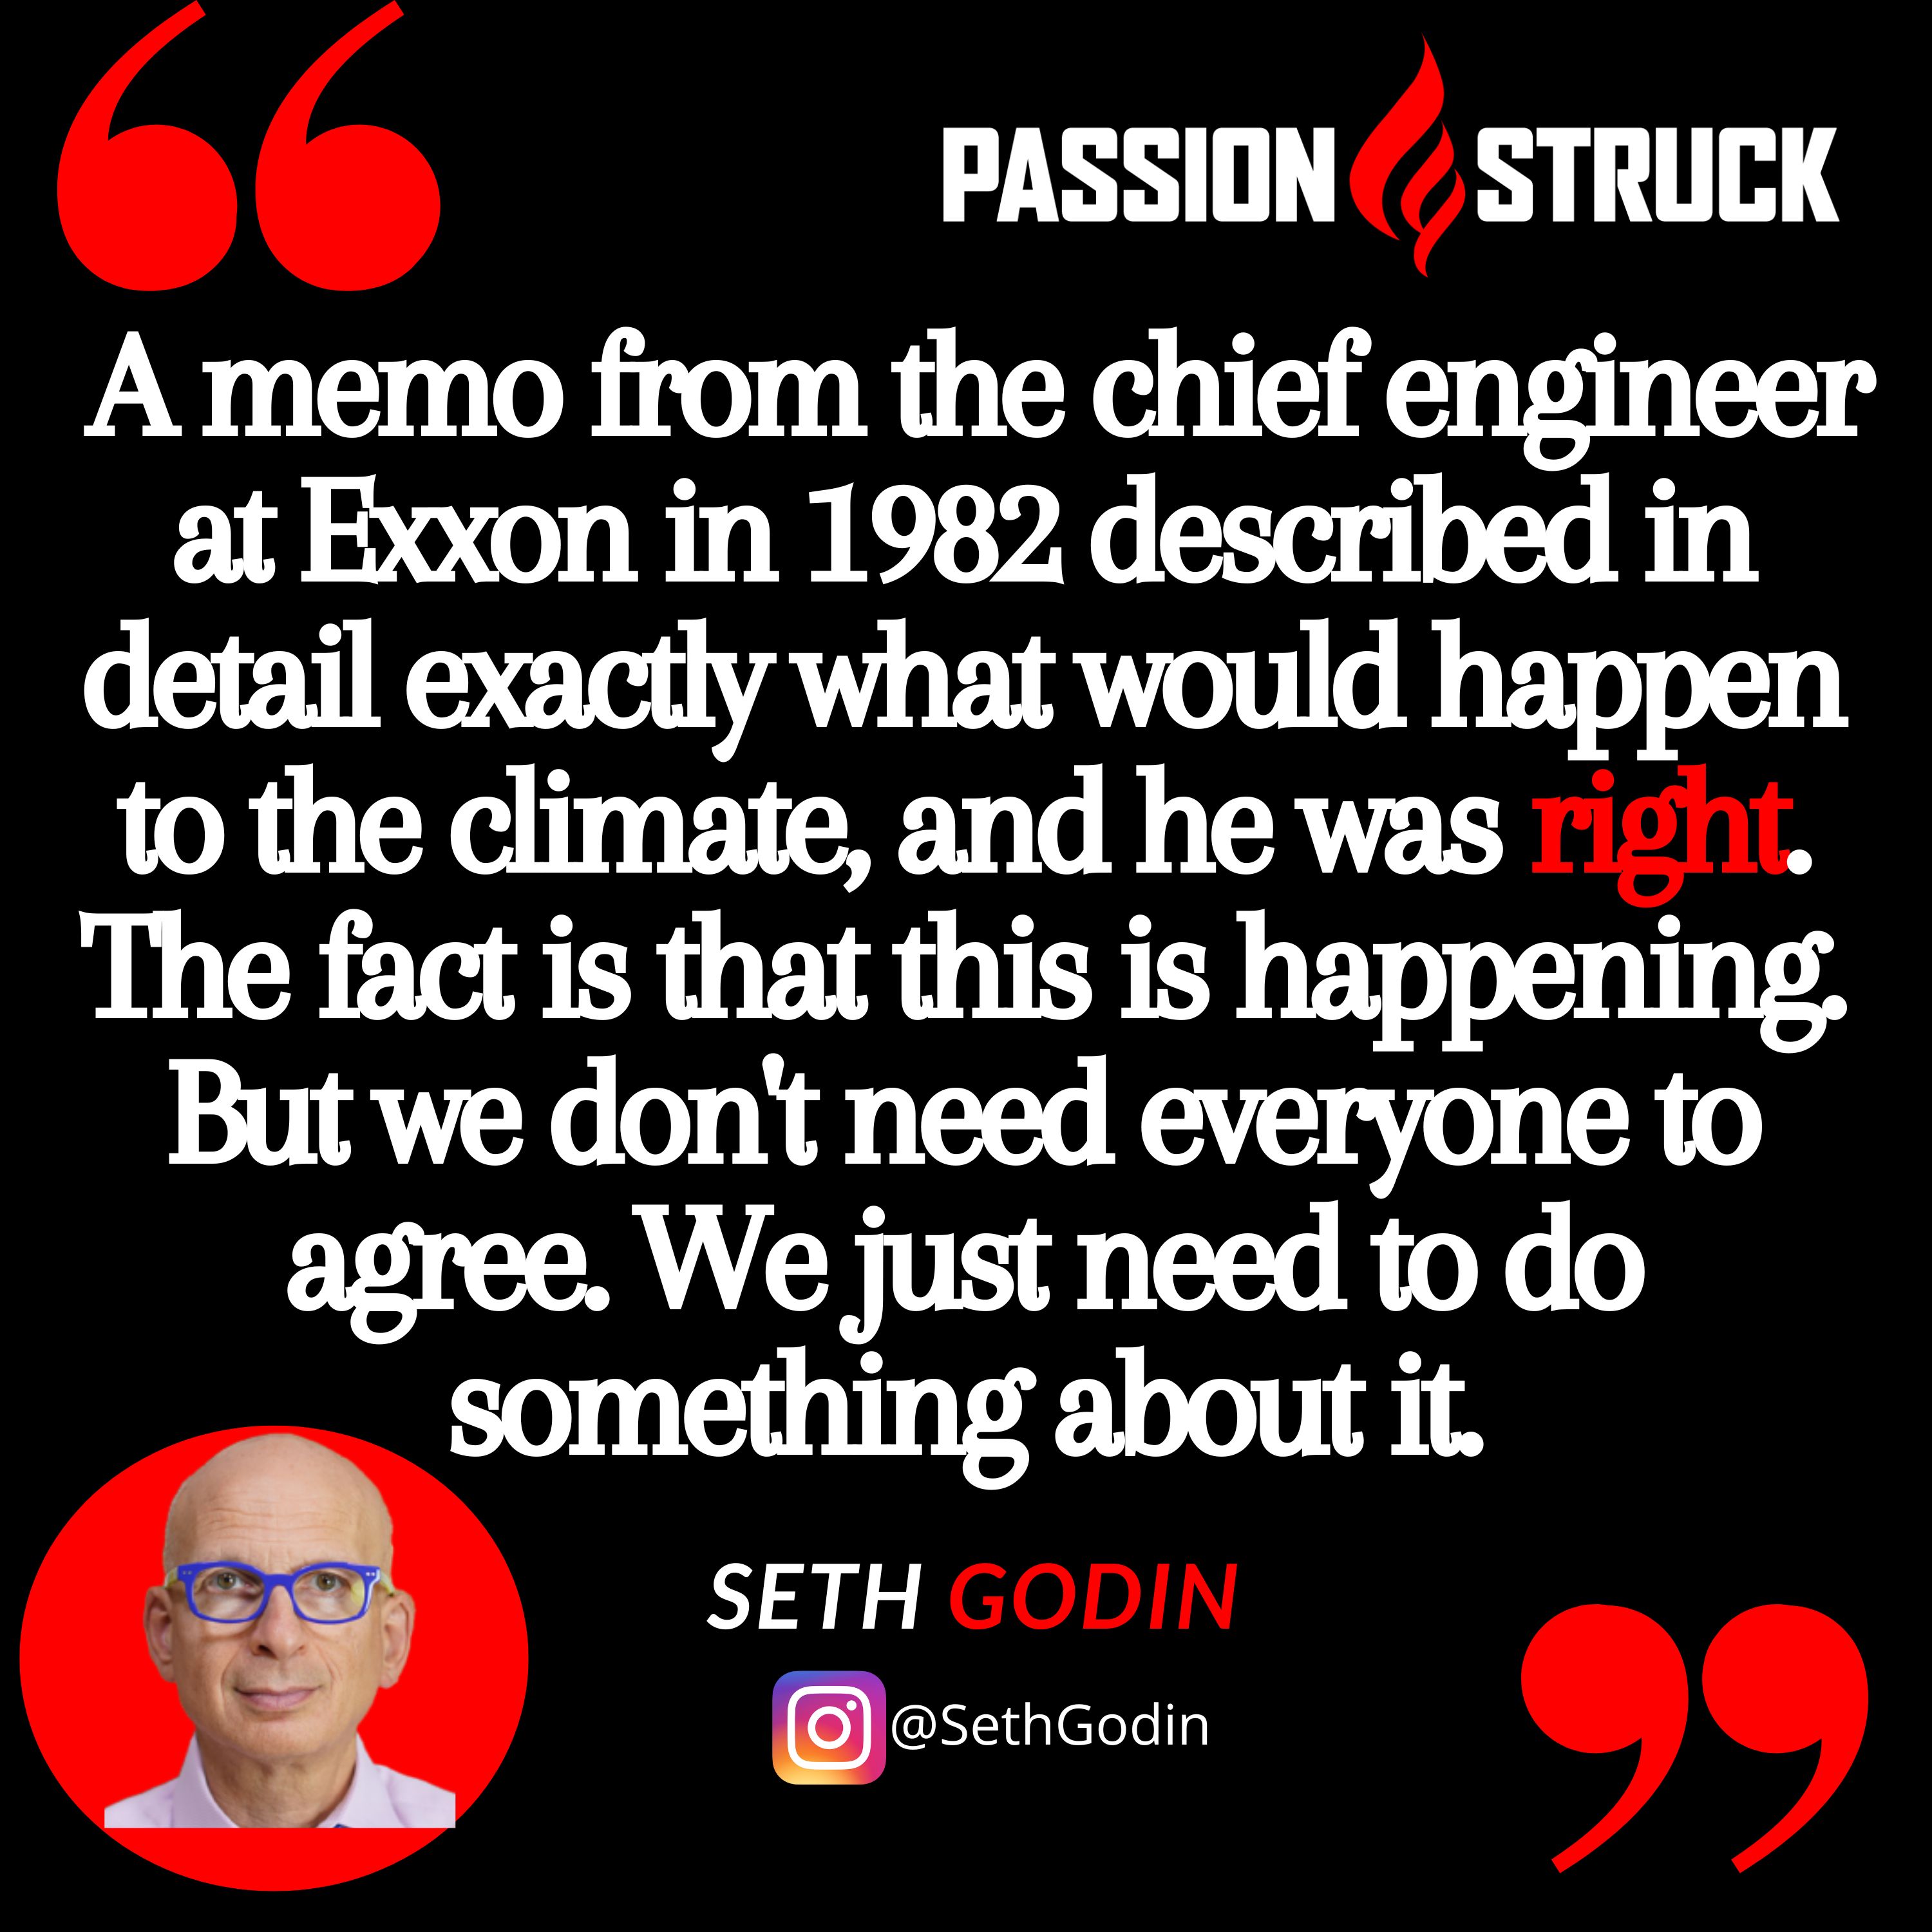 Seth Godin quote from the passion struck podcast: "A memo from the chief engineer at Exxon in 1982 described in detail exactly what would happen to the climate, and he was right. The fact is that this is happening. But we don't need everyone to agree. We just need to do something about it."